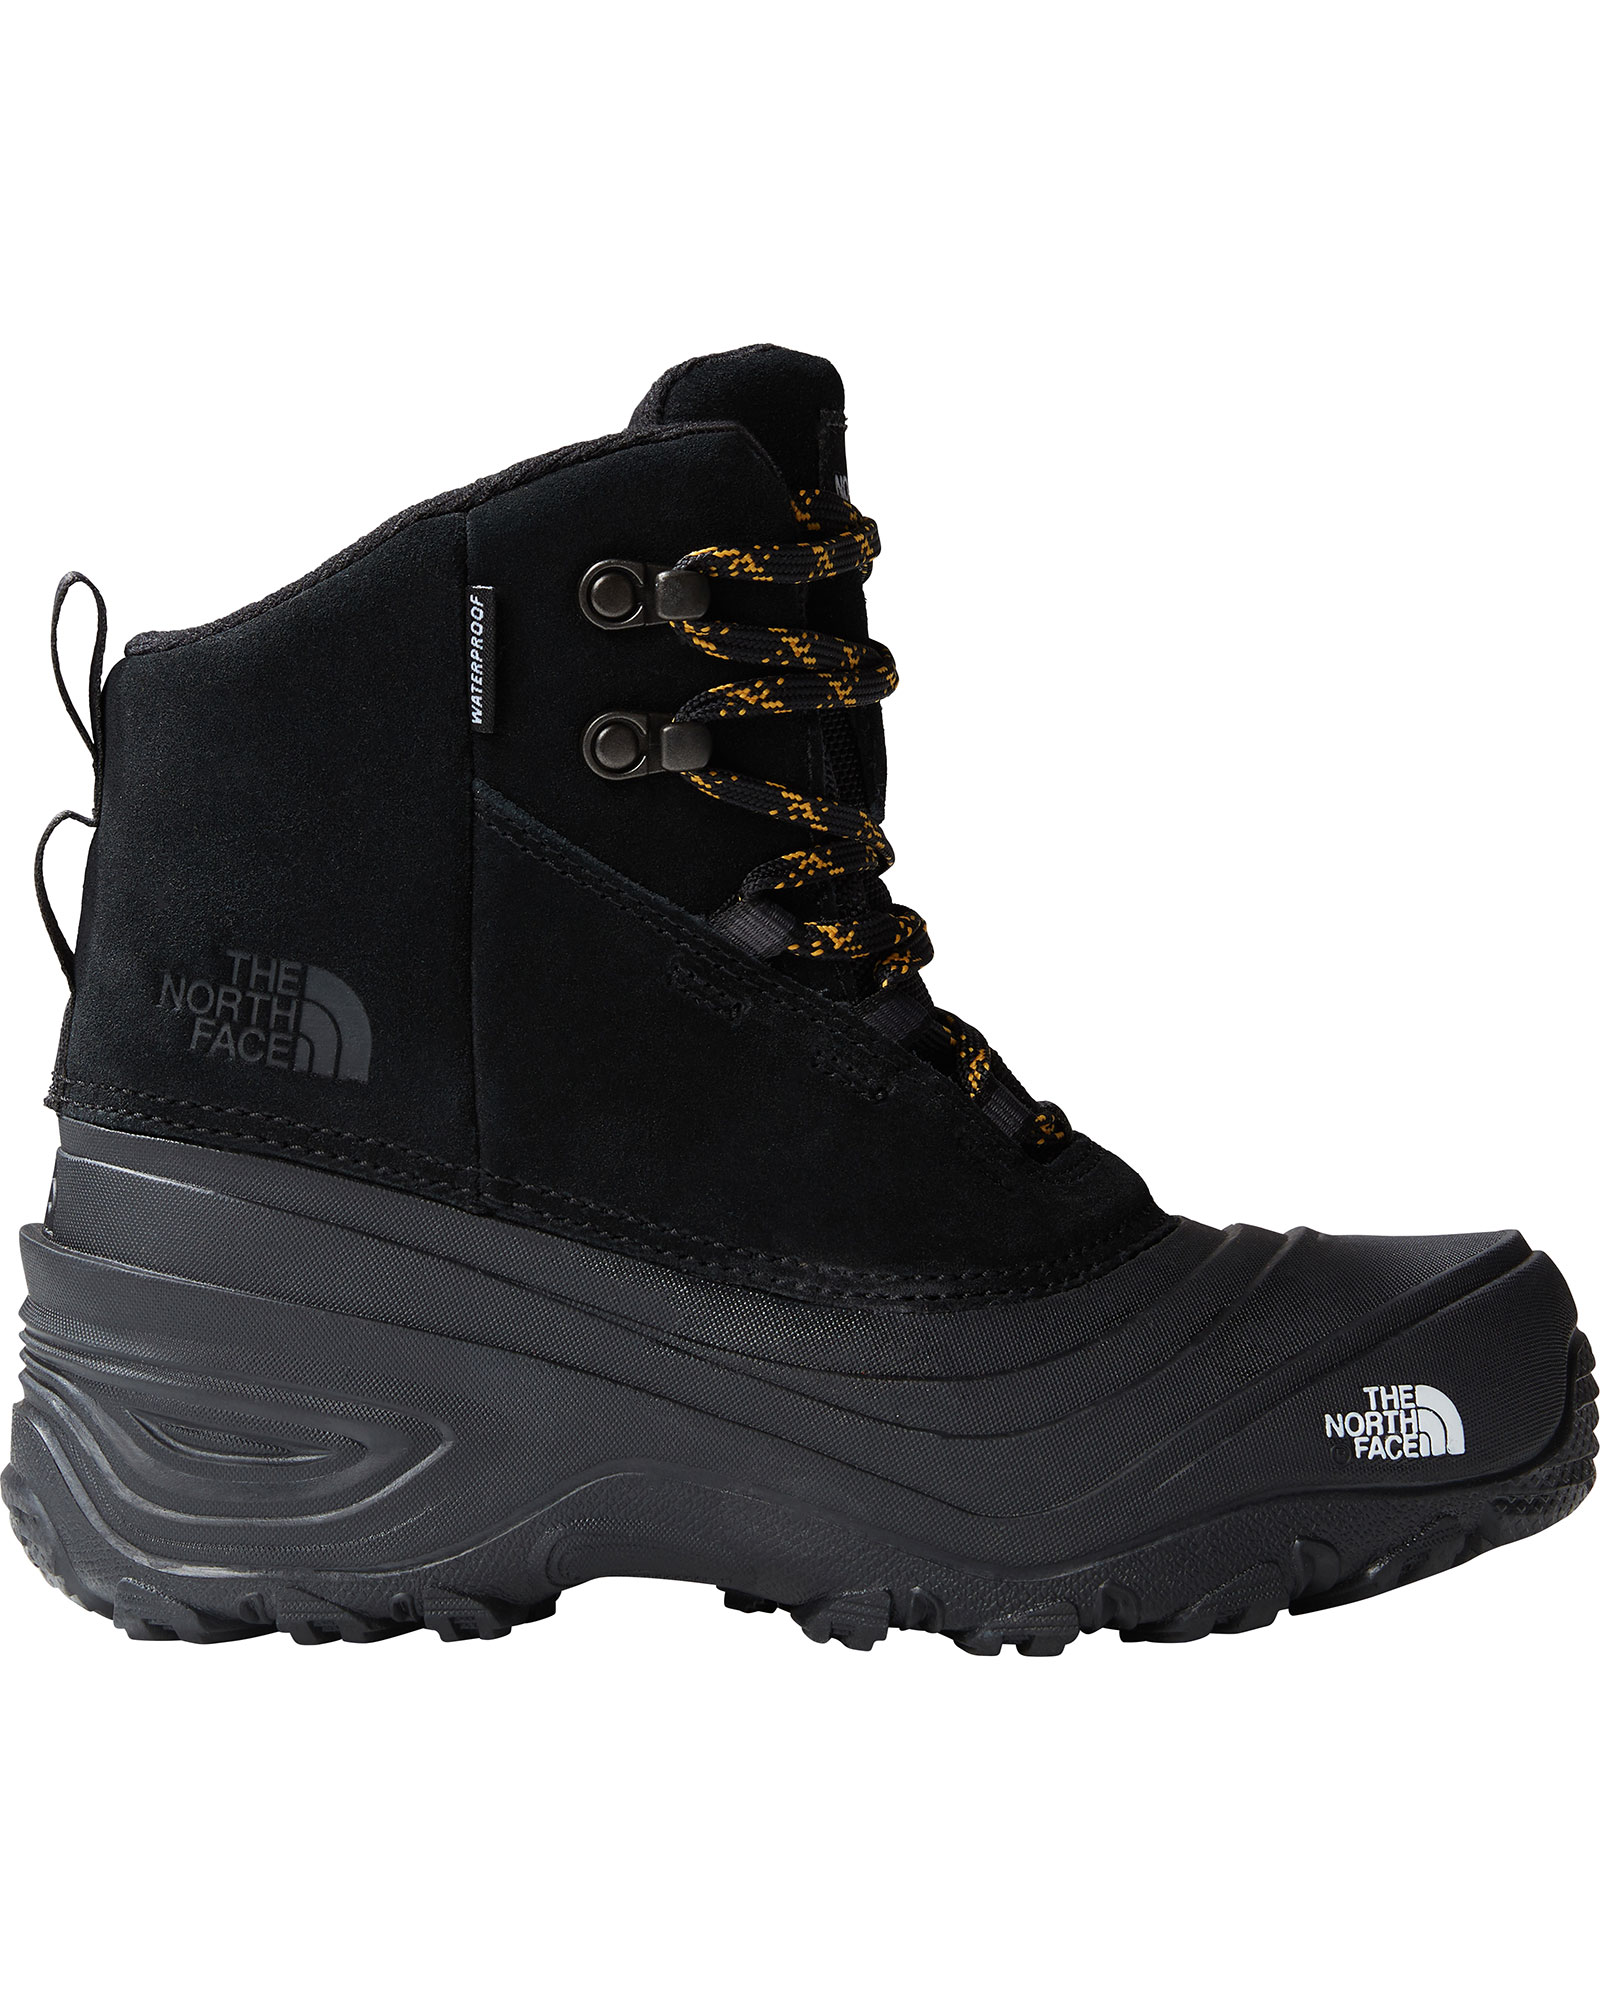 The North Face Youth Chilkat V Lace Waterproof Kid’s Boots - TNF Black/TNF Black UK 2